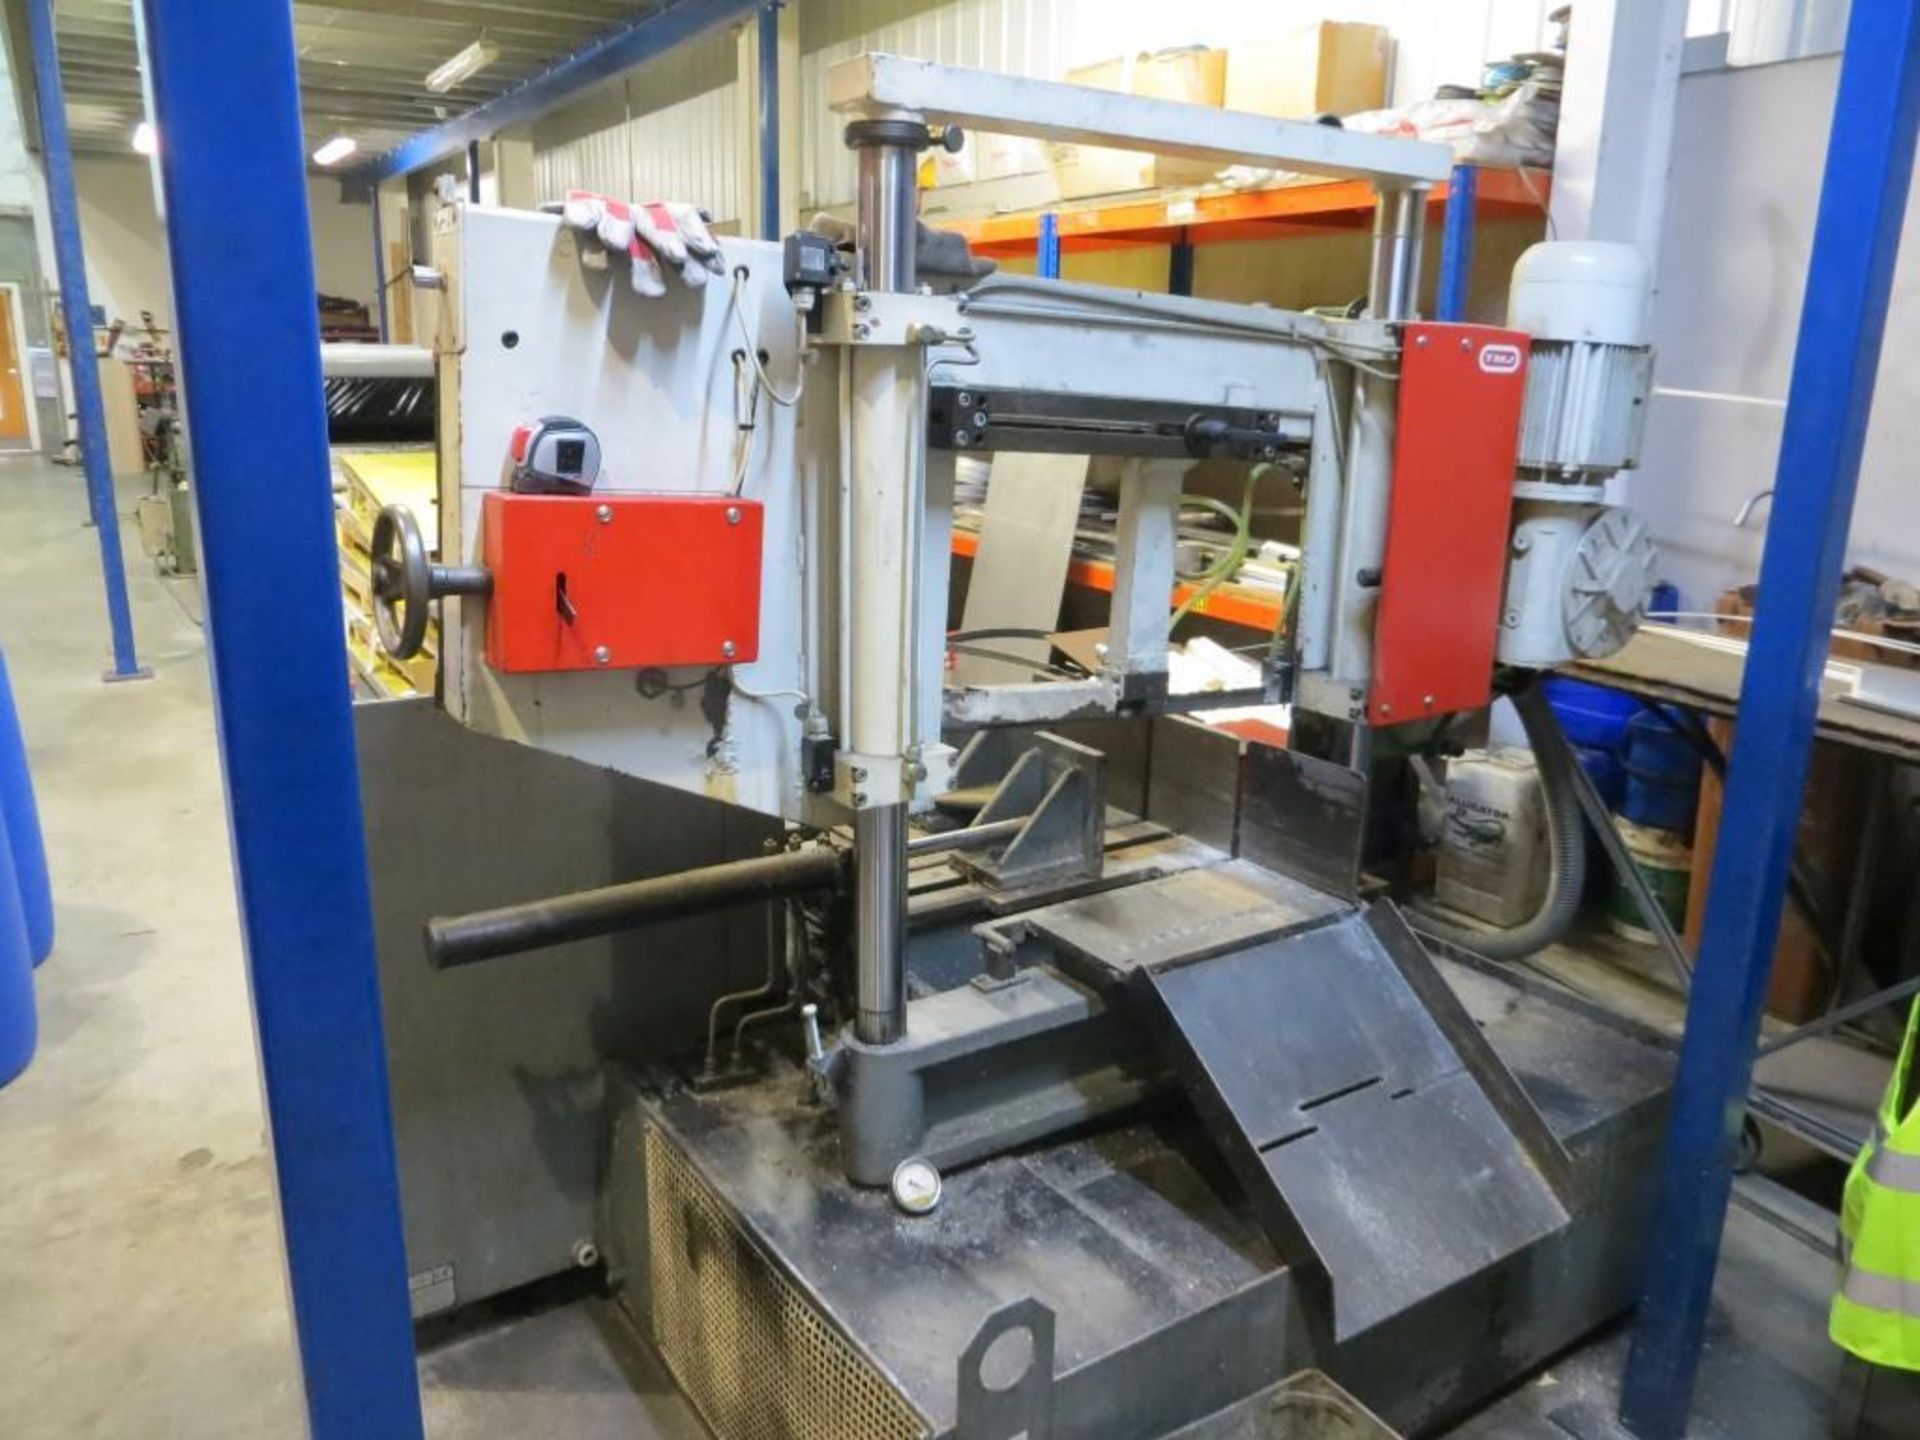 TMJ PP362 CNC double column band saw, (please note three phase, electrical disconnection will be - Image 3 of 8